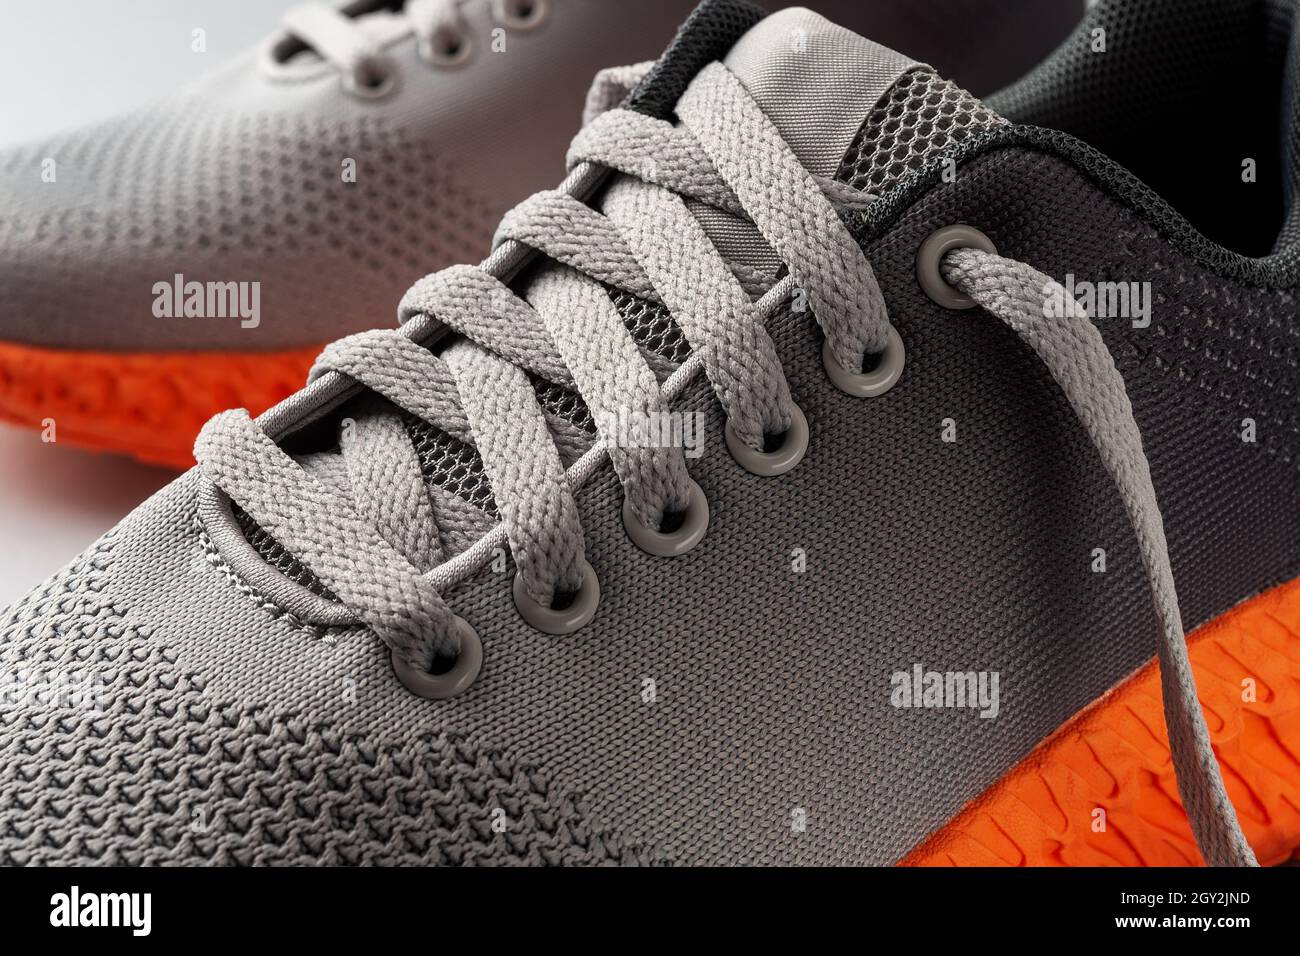 Lacing up the sneakers. Elastic laces of gray mesh fabric sneakers with orange grooved sole. Modern textile trainers for sport and active lifestyle. Stock Photo